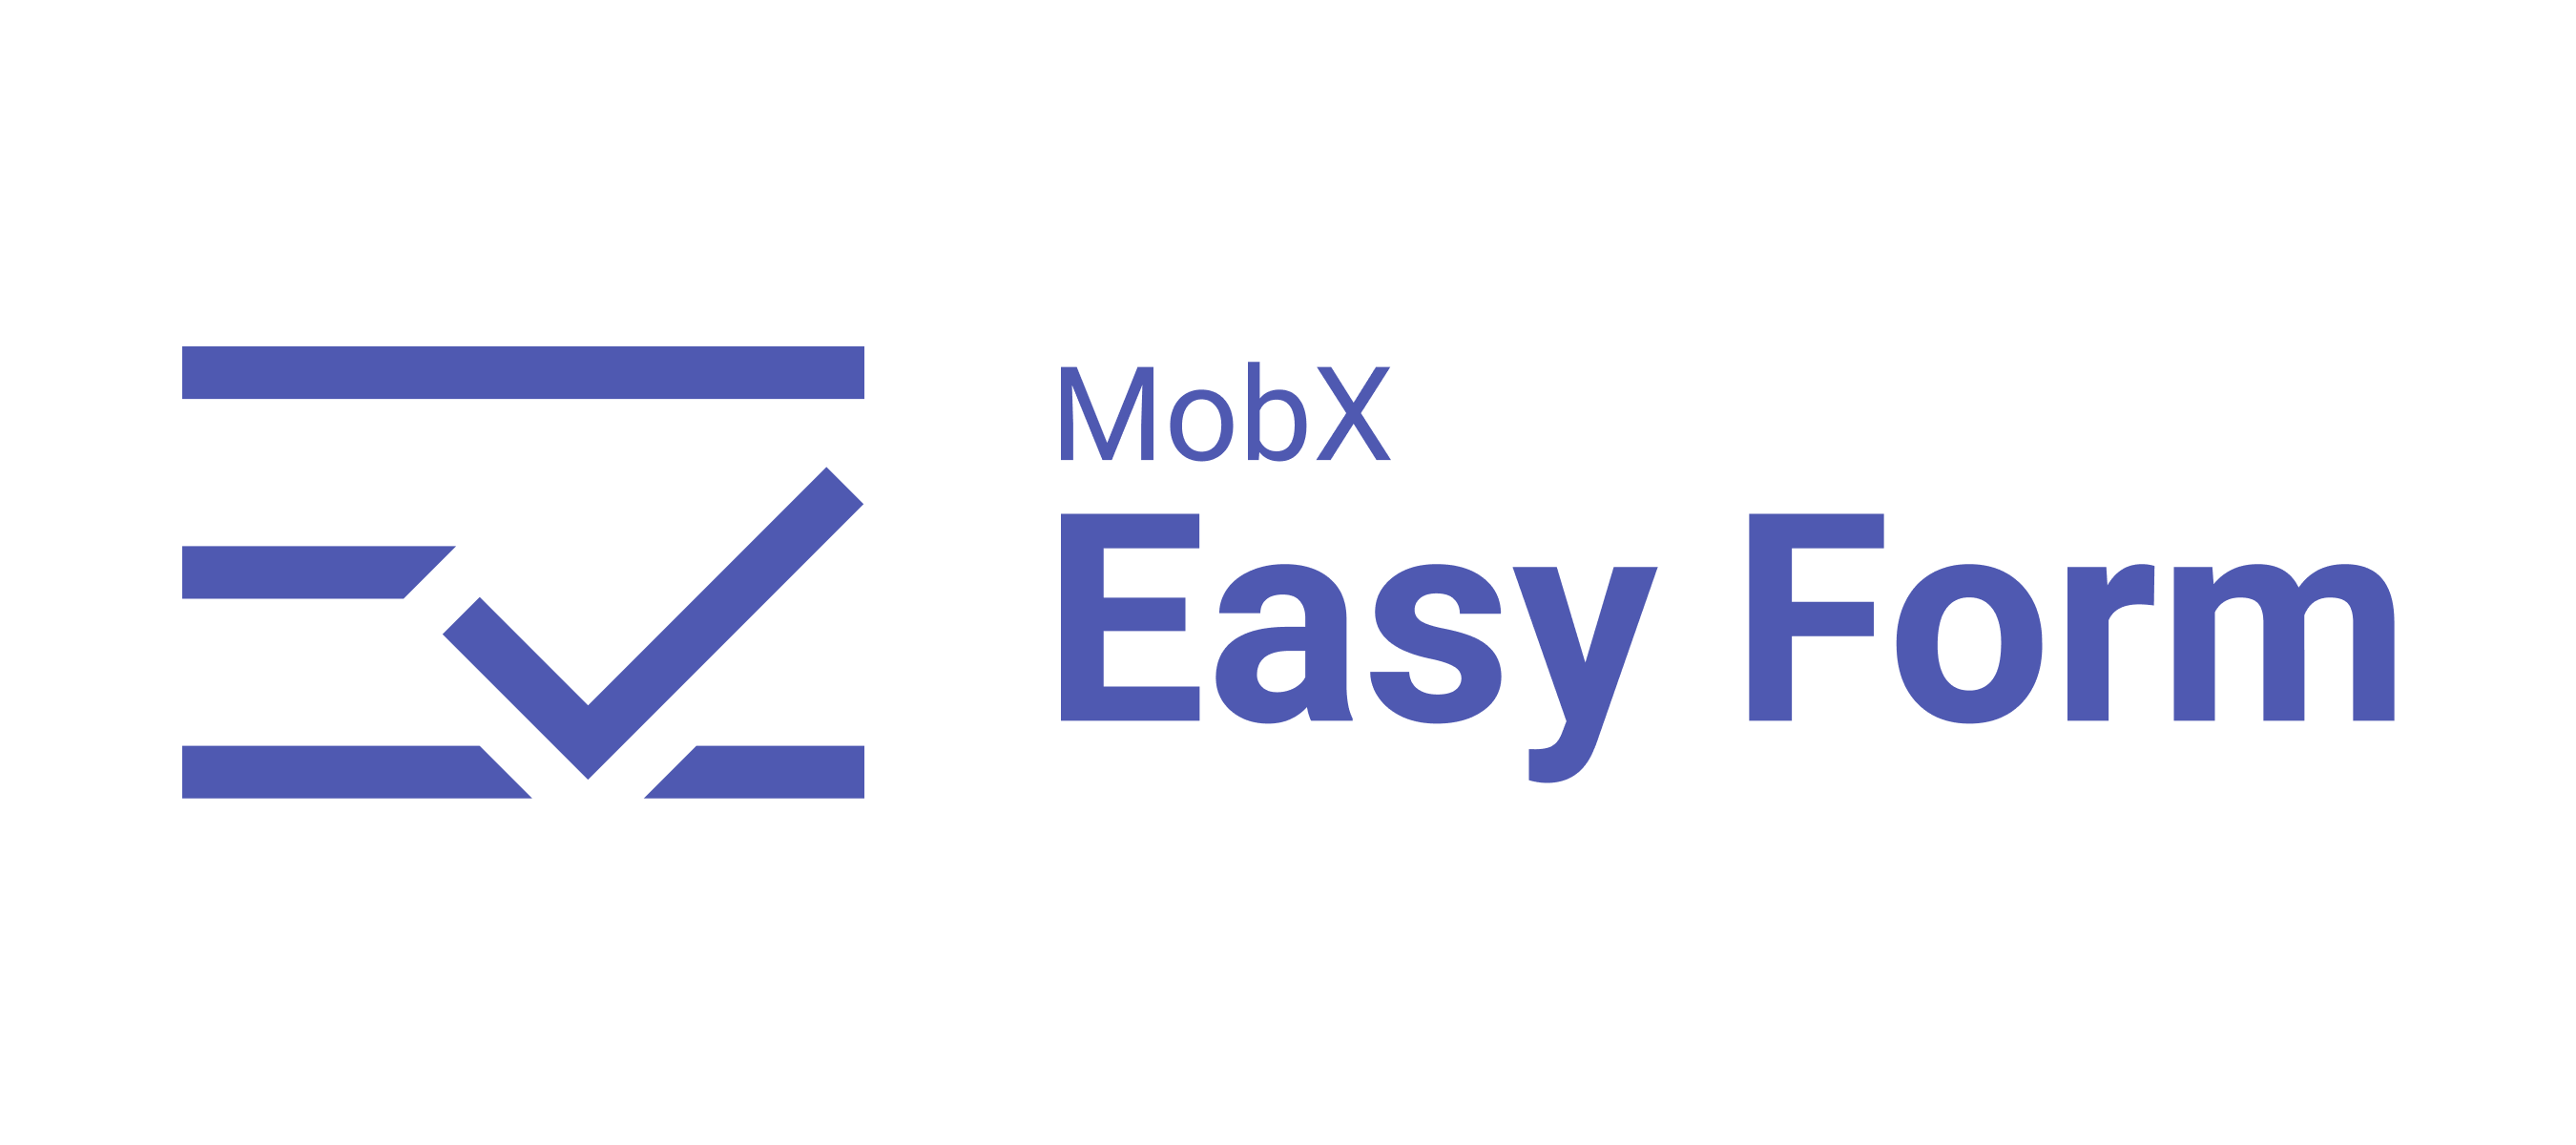 MobX Easy Form